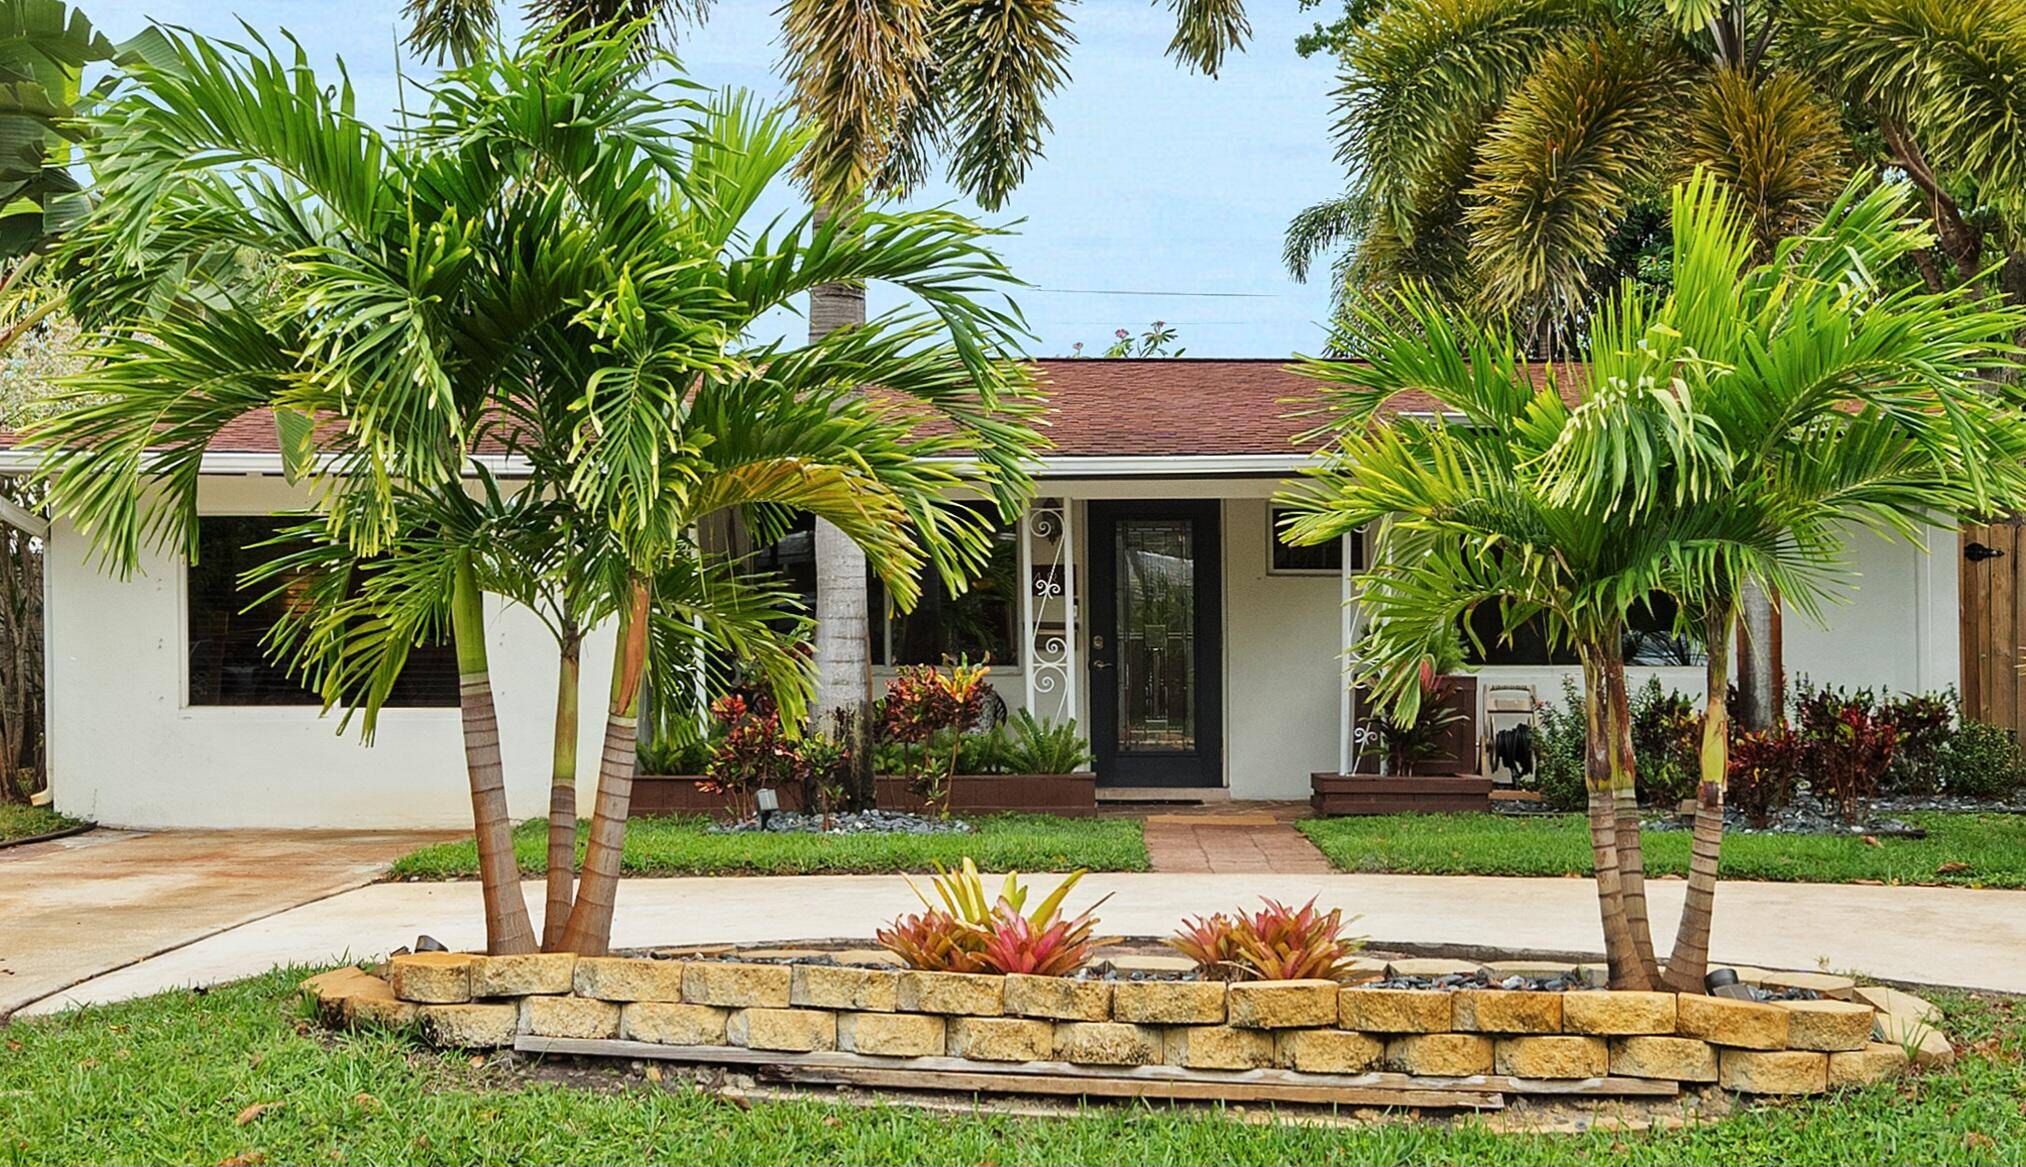 Don't miss your chance to own an adorable, well kept single family home in the sought after neighborhood of North Andrews Gardens near Fort Lauderdale.